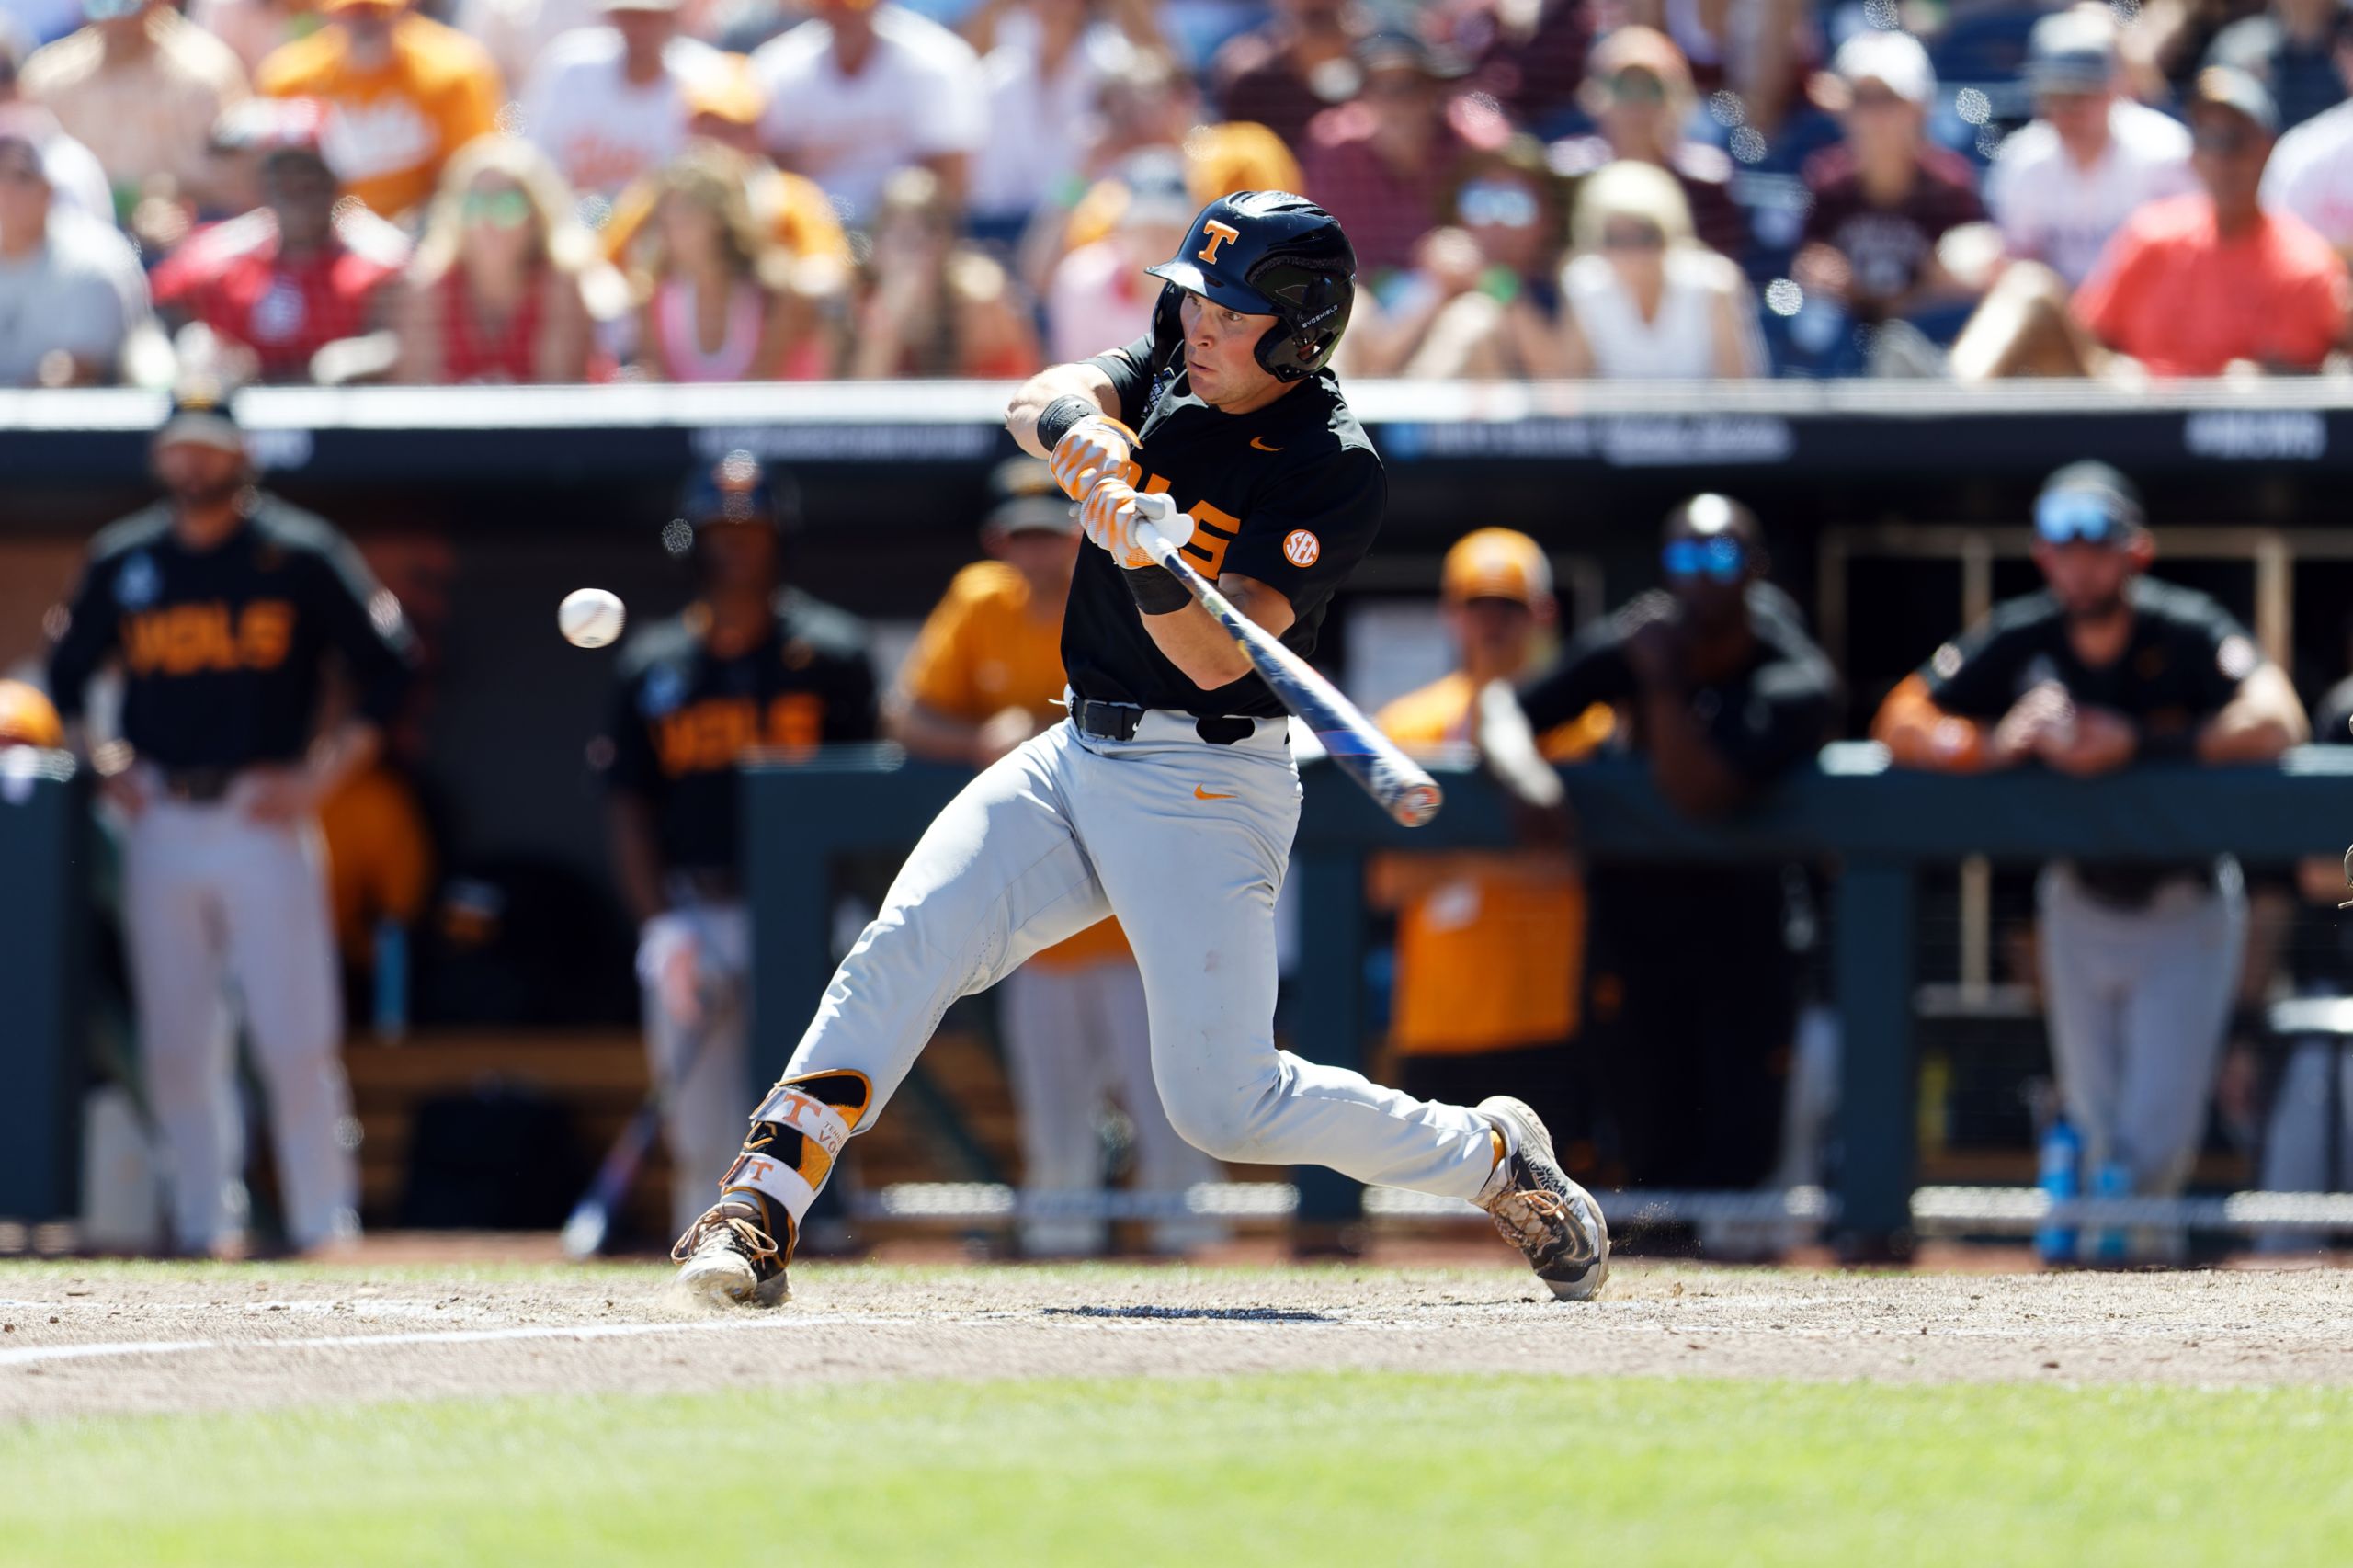 Tennessee catches up, beats Texas A&M and forces third college game of the World Series